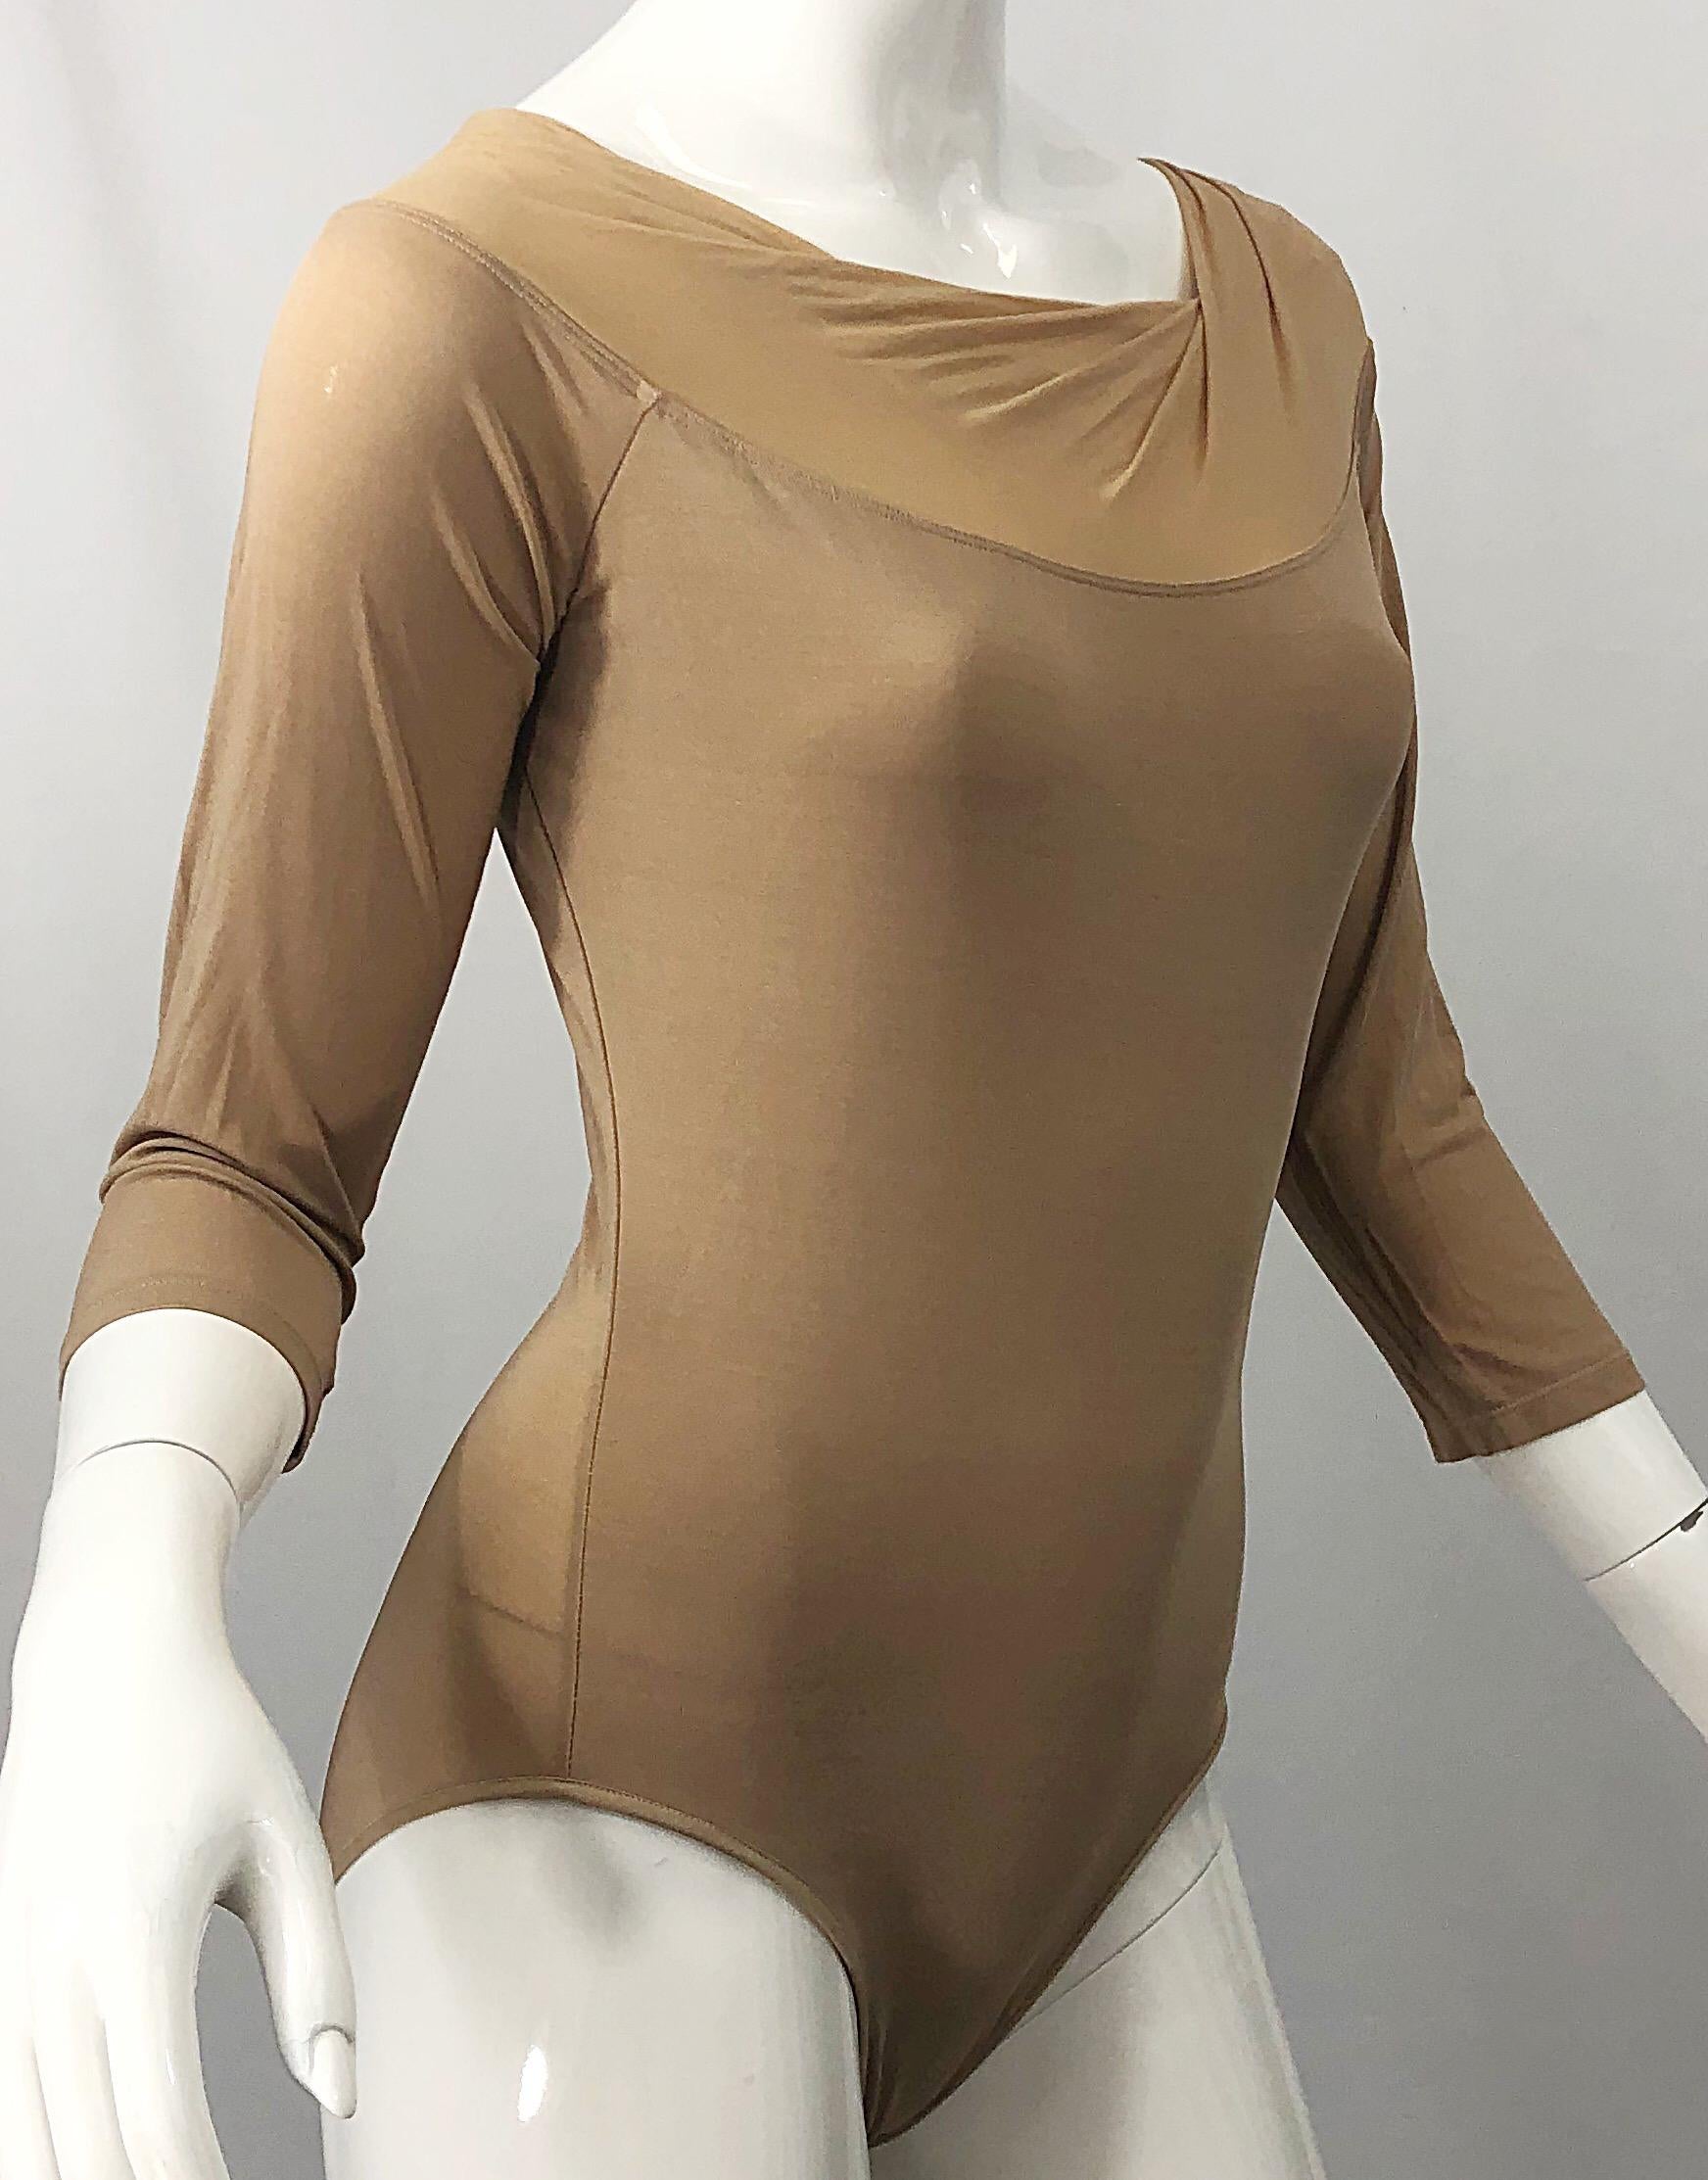 NWT $950 Donna Karan Collection 1990s Camel Nude 3/4 Sleeve One Piece Bodysuit M 2